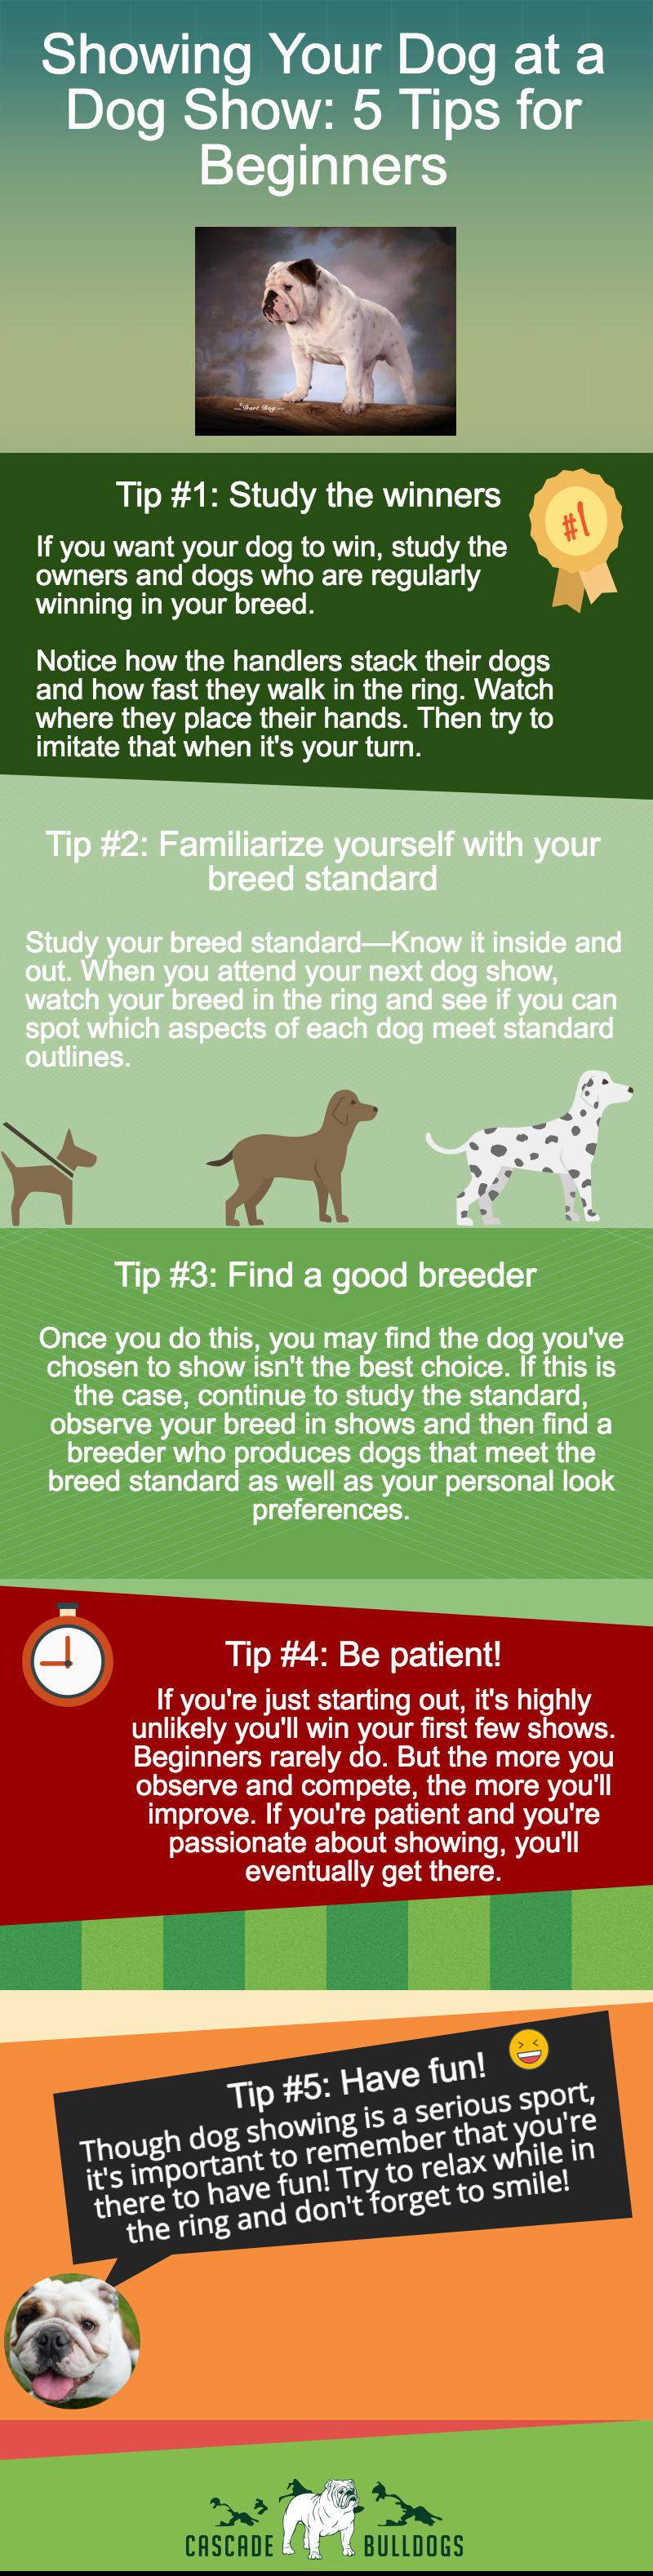 5 Dog Show Tips for Beginners